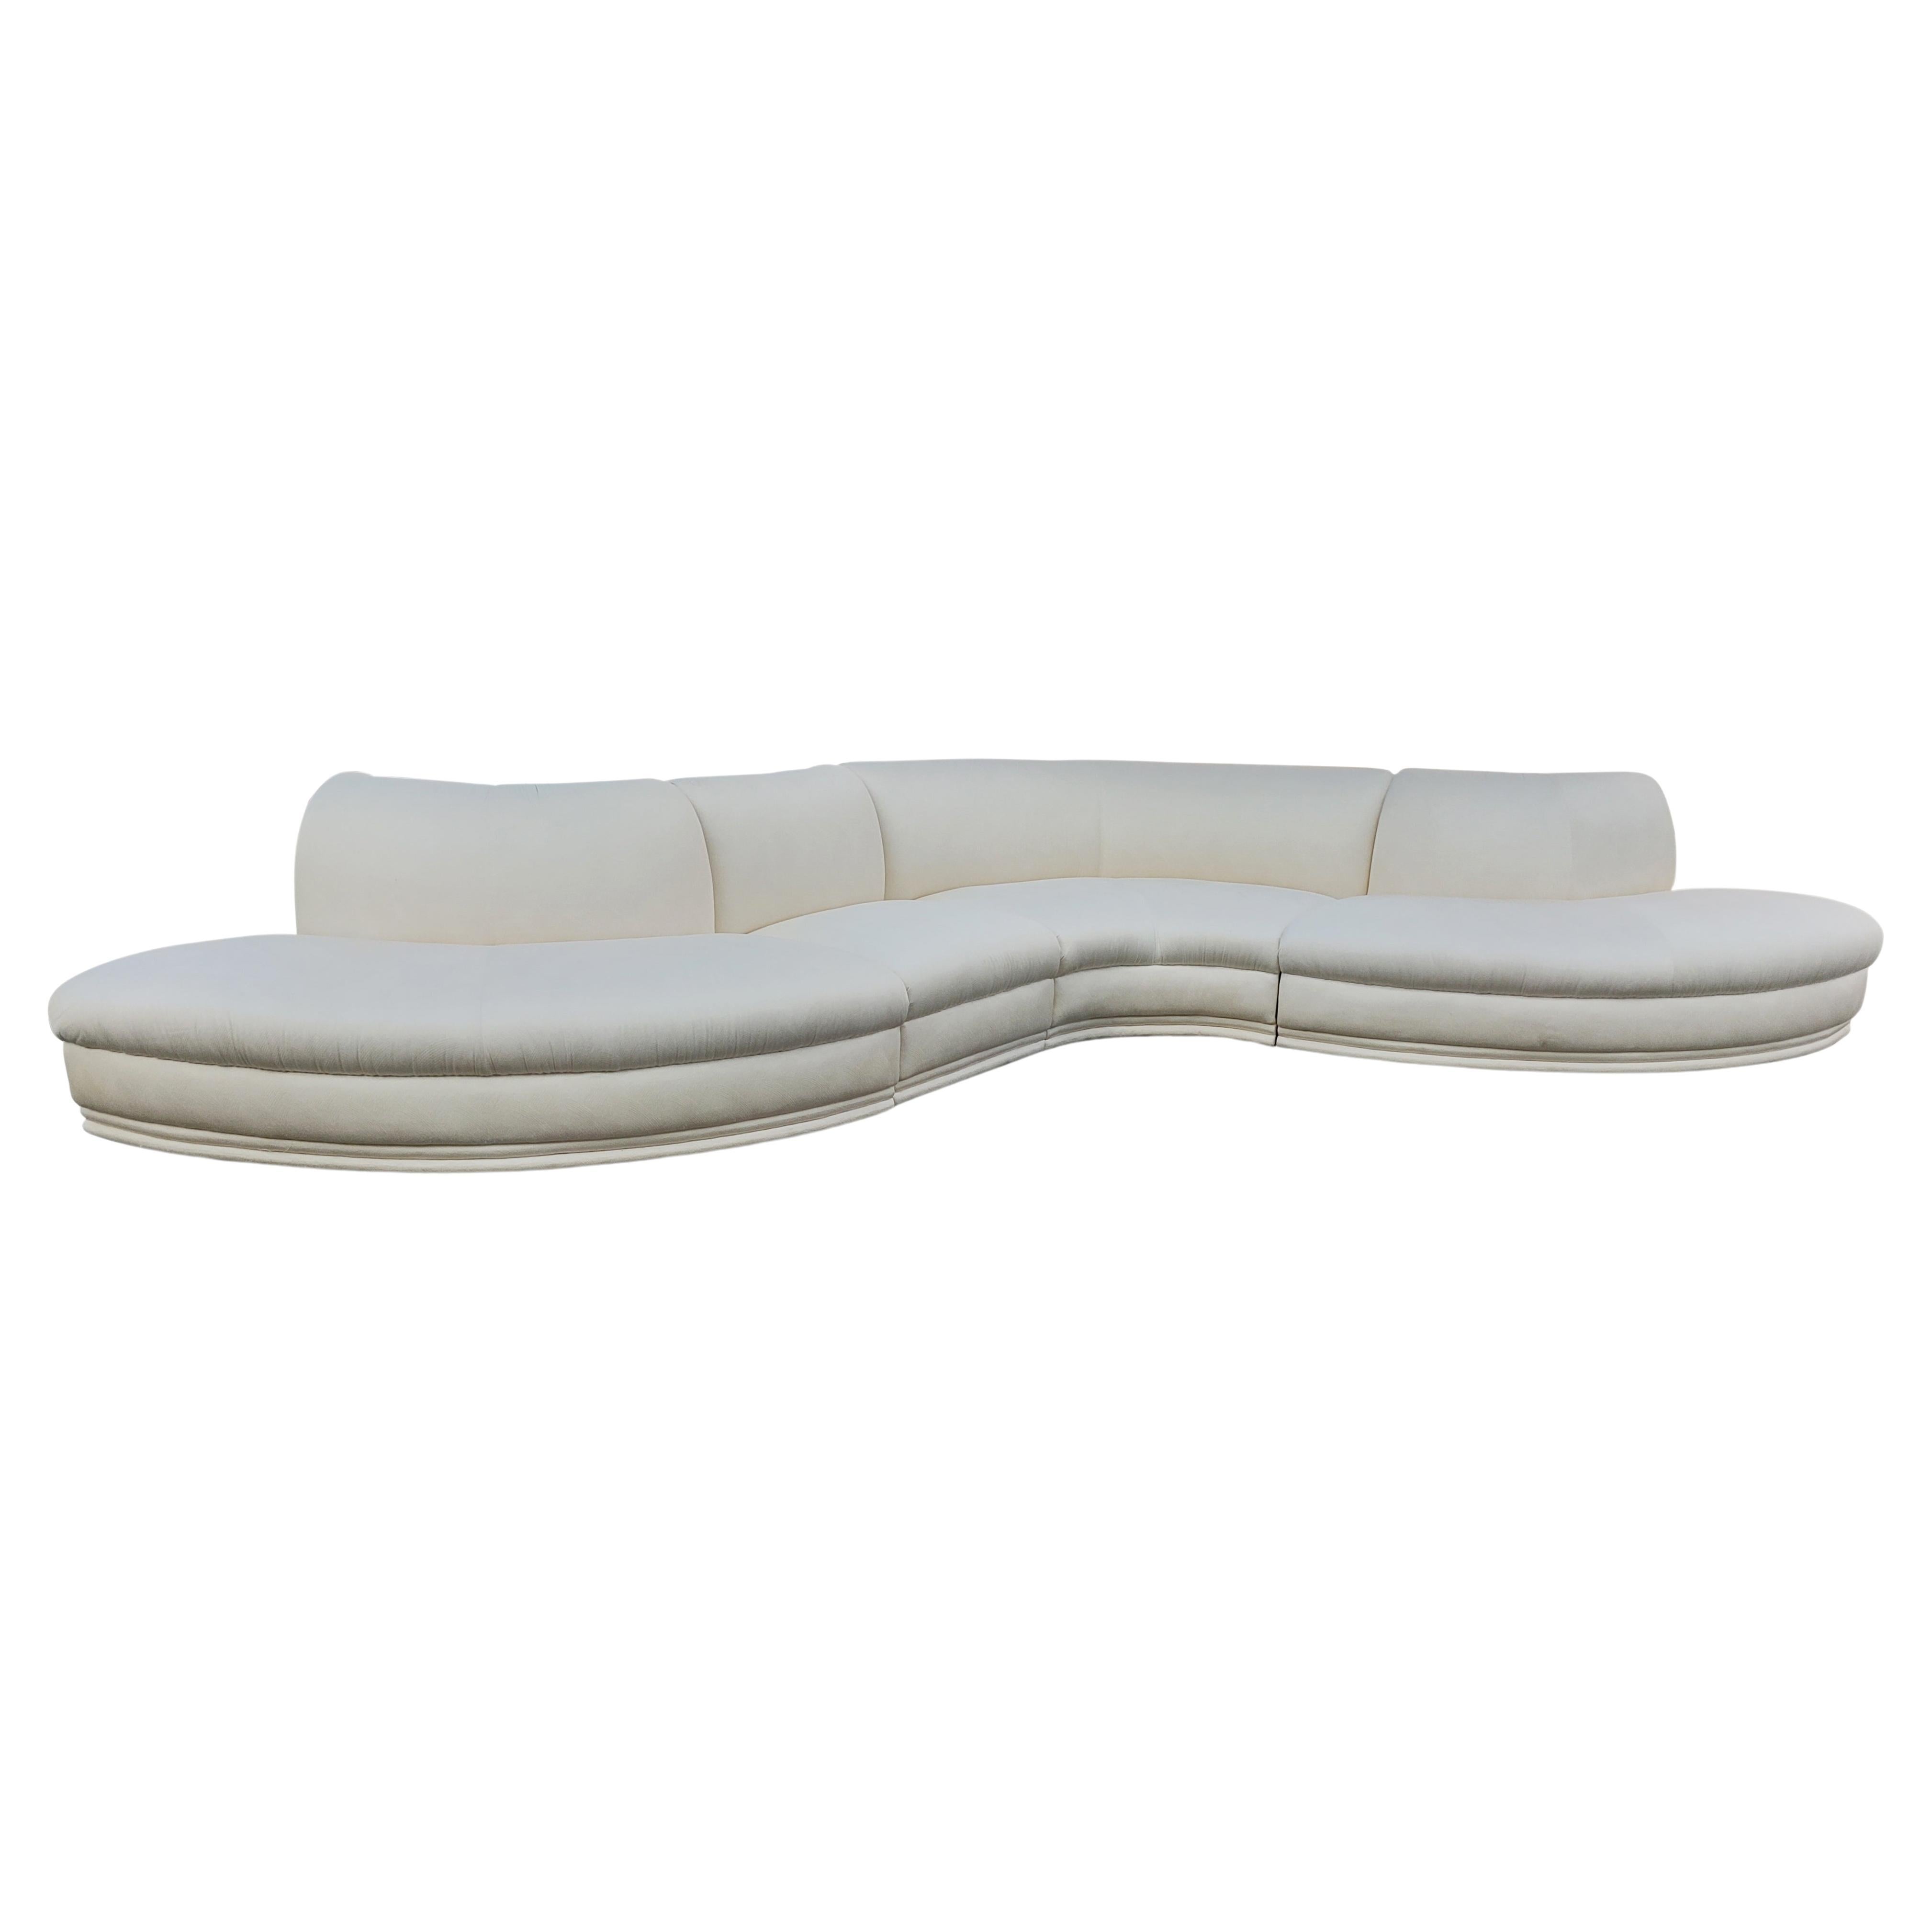 A stunning and sculptural sofa produced by Weiman Furniture Company from the 1980s and is super comfortable. It features a four-piece design with low profile feet. This sofa is in its original white upholstry with an alternating shell-like pattern.